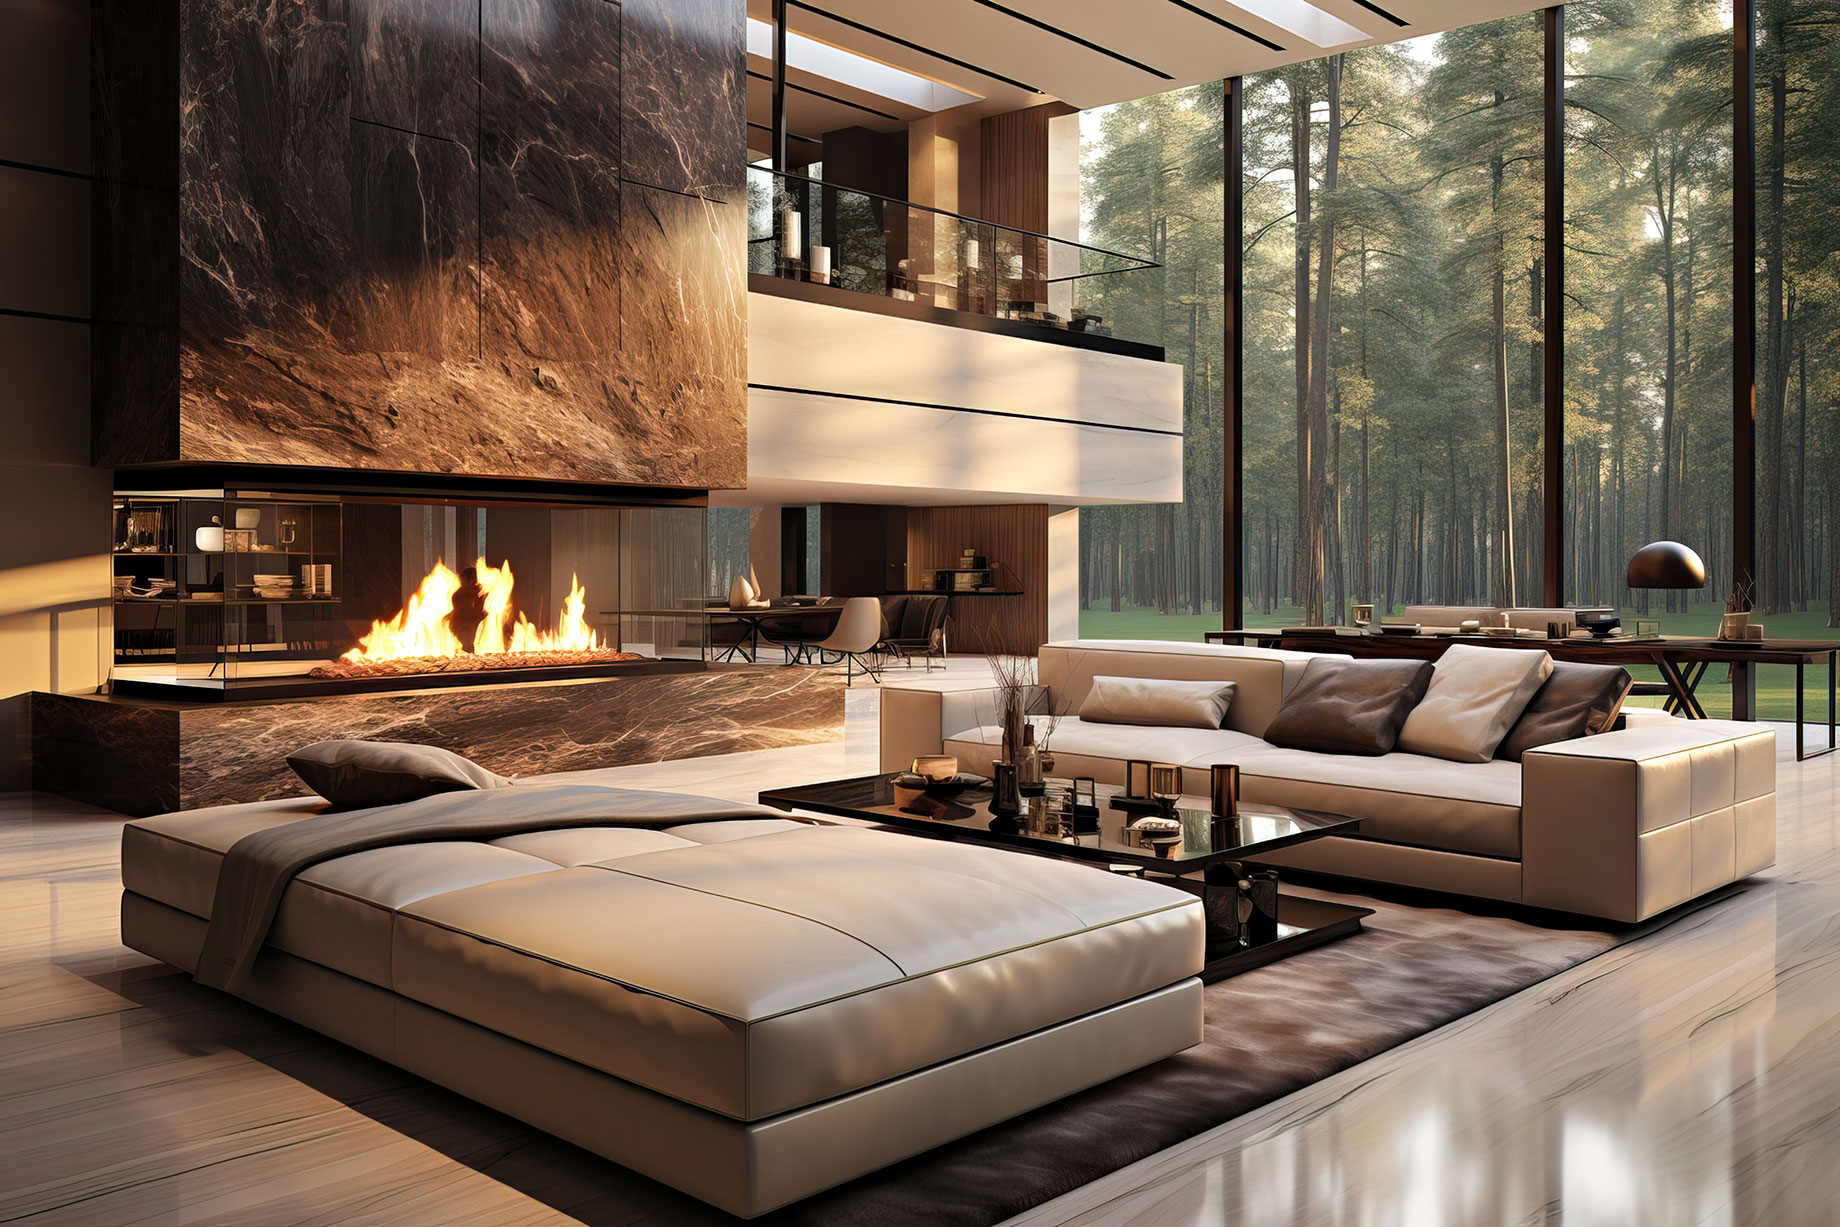 Textured Narratives – Luxury High-Ceiling Living Room, Large Couches, Tall Stone Fireplace, and Forest View